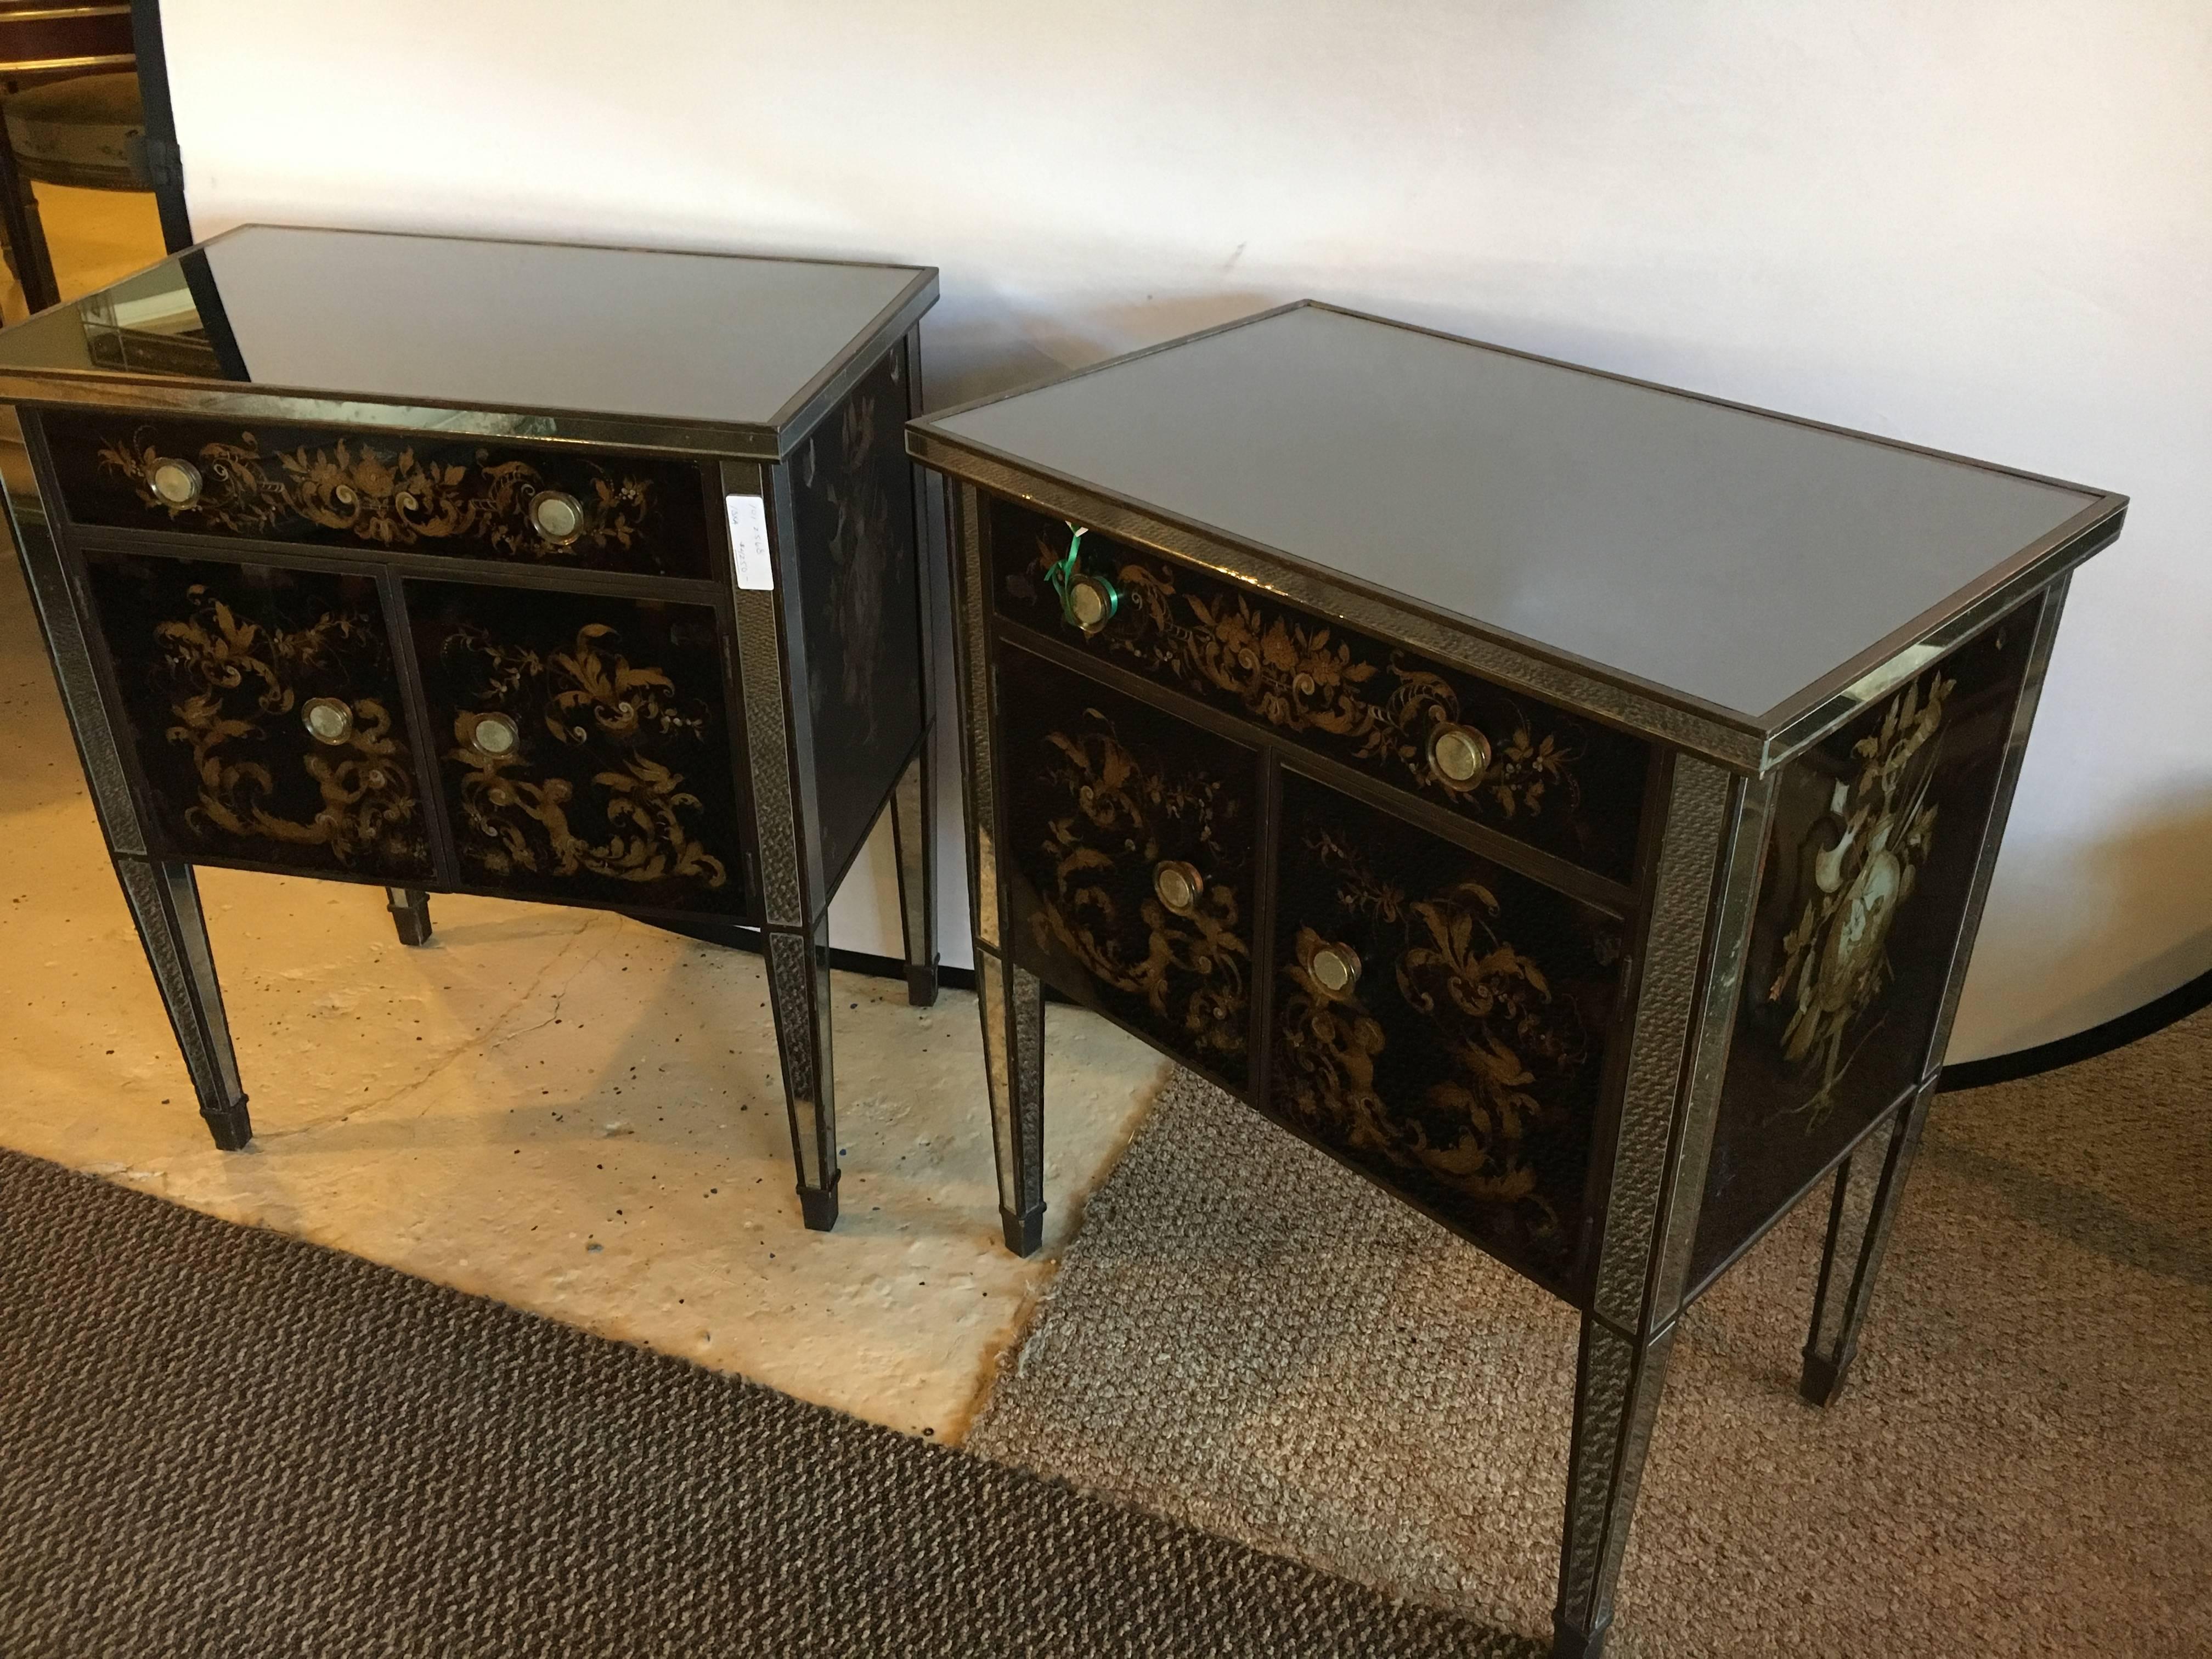 Pair of Jansen mirror and églomisé nightstands or end tables. A pair of wooden vintage case with later decorated mirrored and églomisé decorated panels. The tapering legs supporting a pair of door under a single drawer. Each distress decorated.